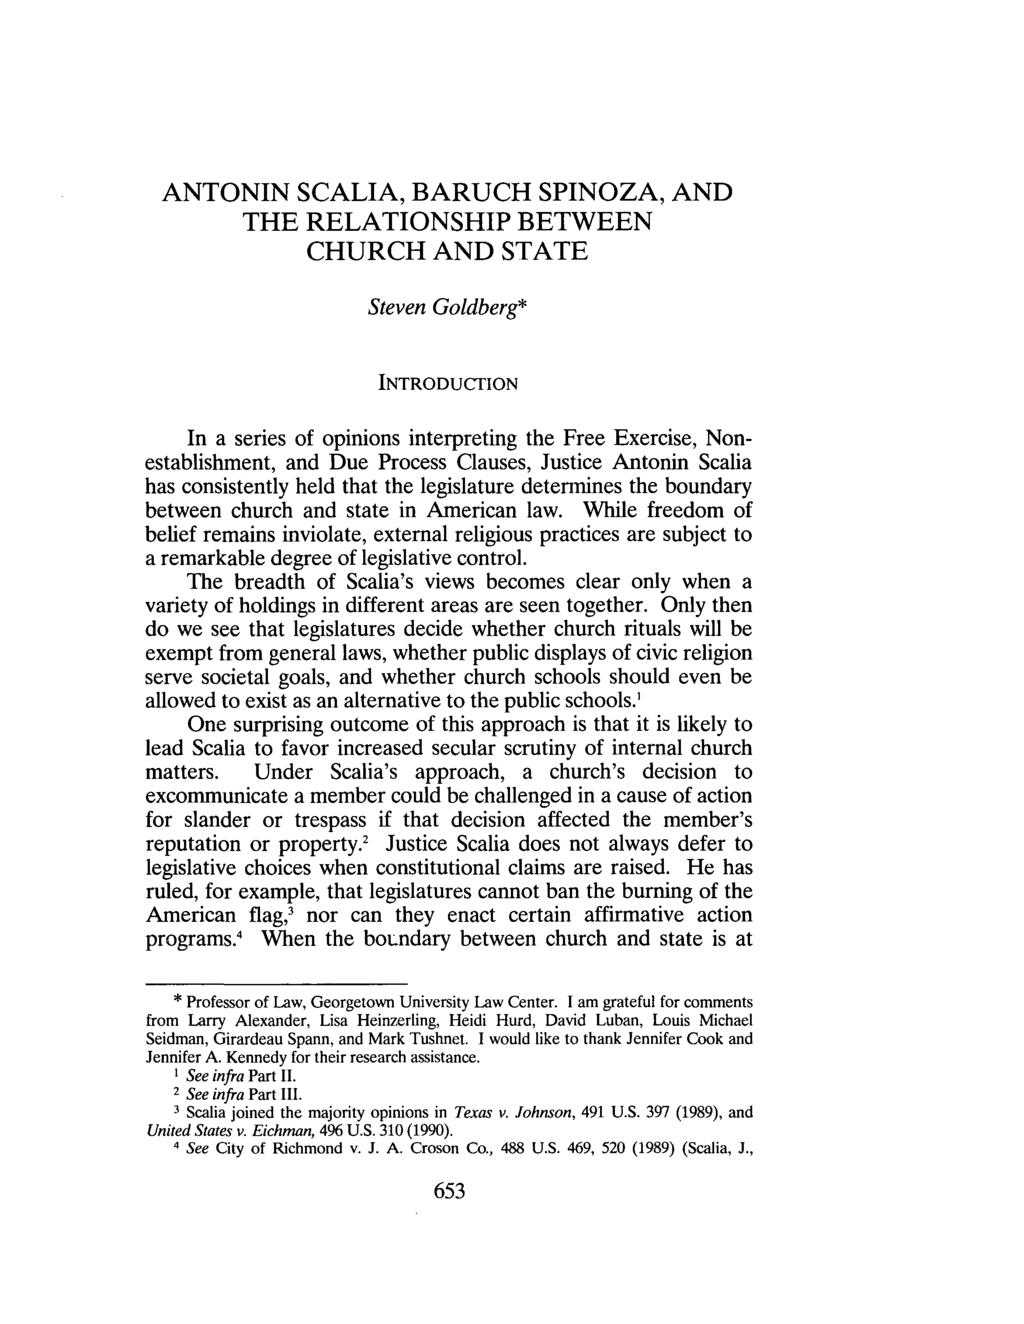 ANTONIN SCALIA, BARUCH SPINOZA, AND THE RELATIONSHIP BETWEEN CHURCH AND STATE Steven Goldberg* INTRODUCfION In a series of opinions interpreting the Free Exercise, Nonestablishment, and Due Process